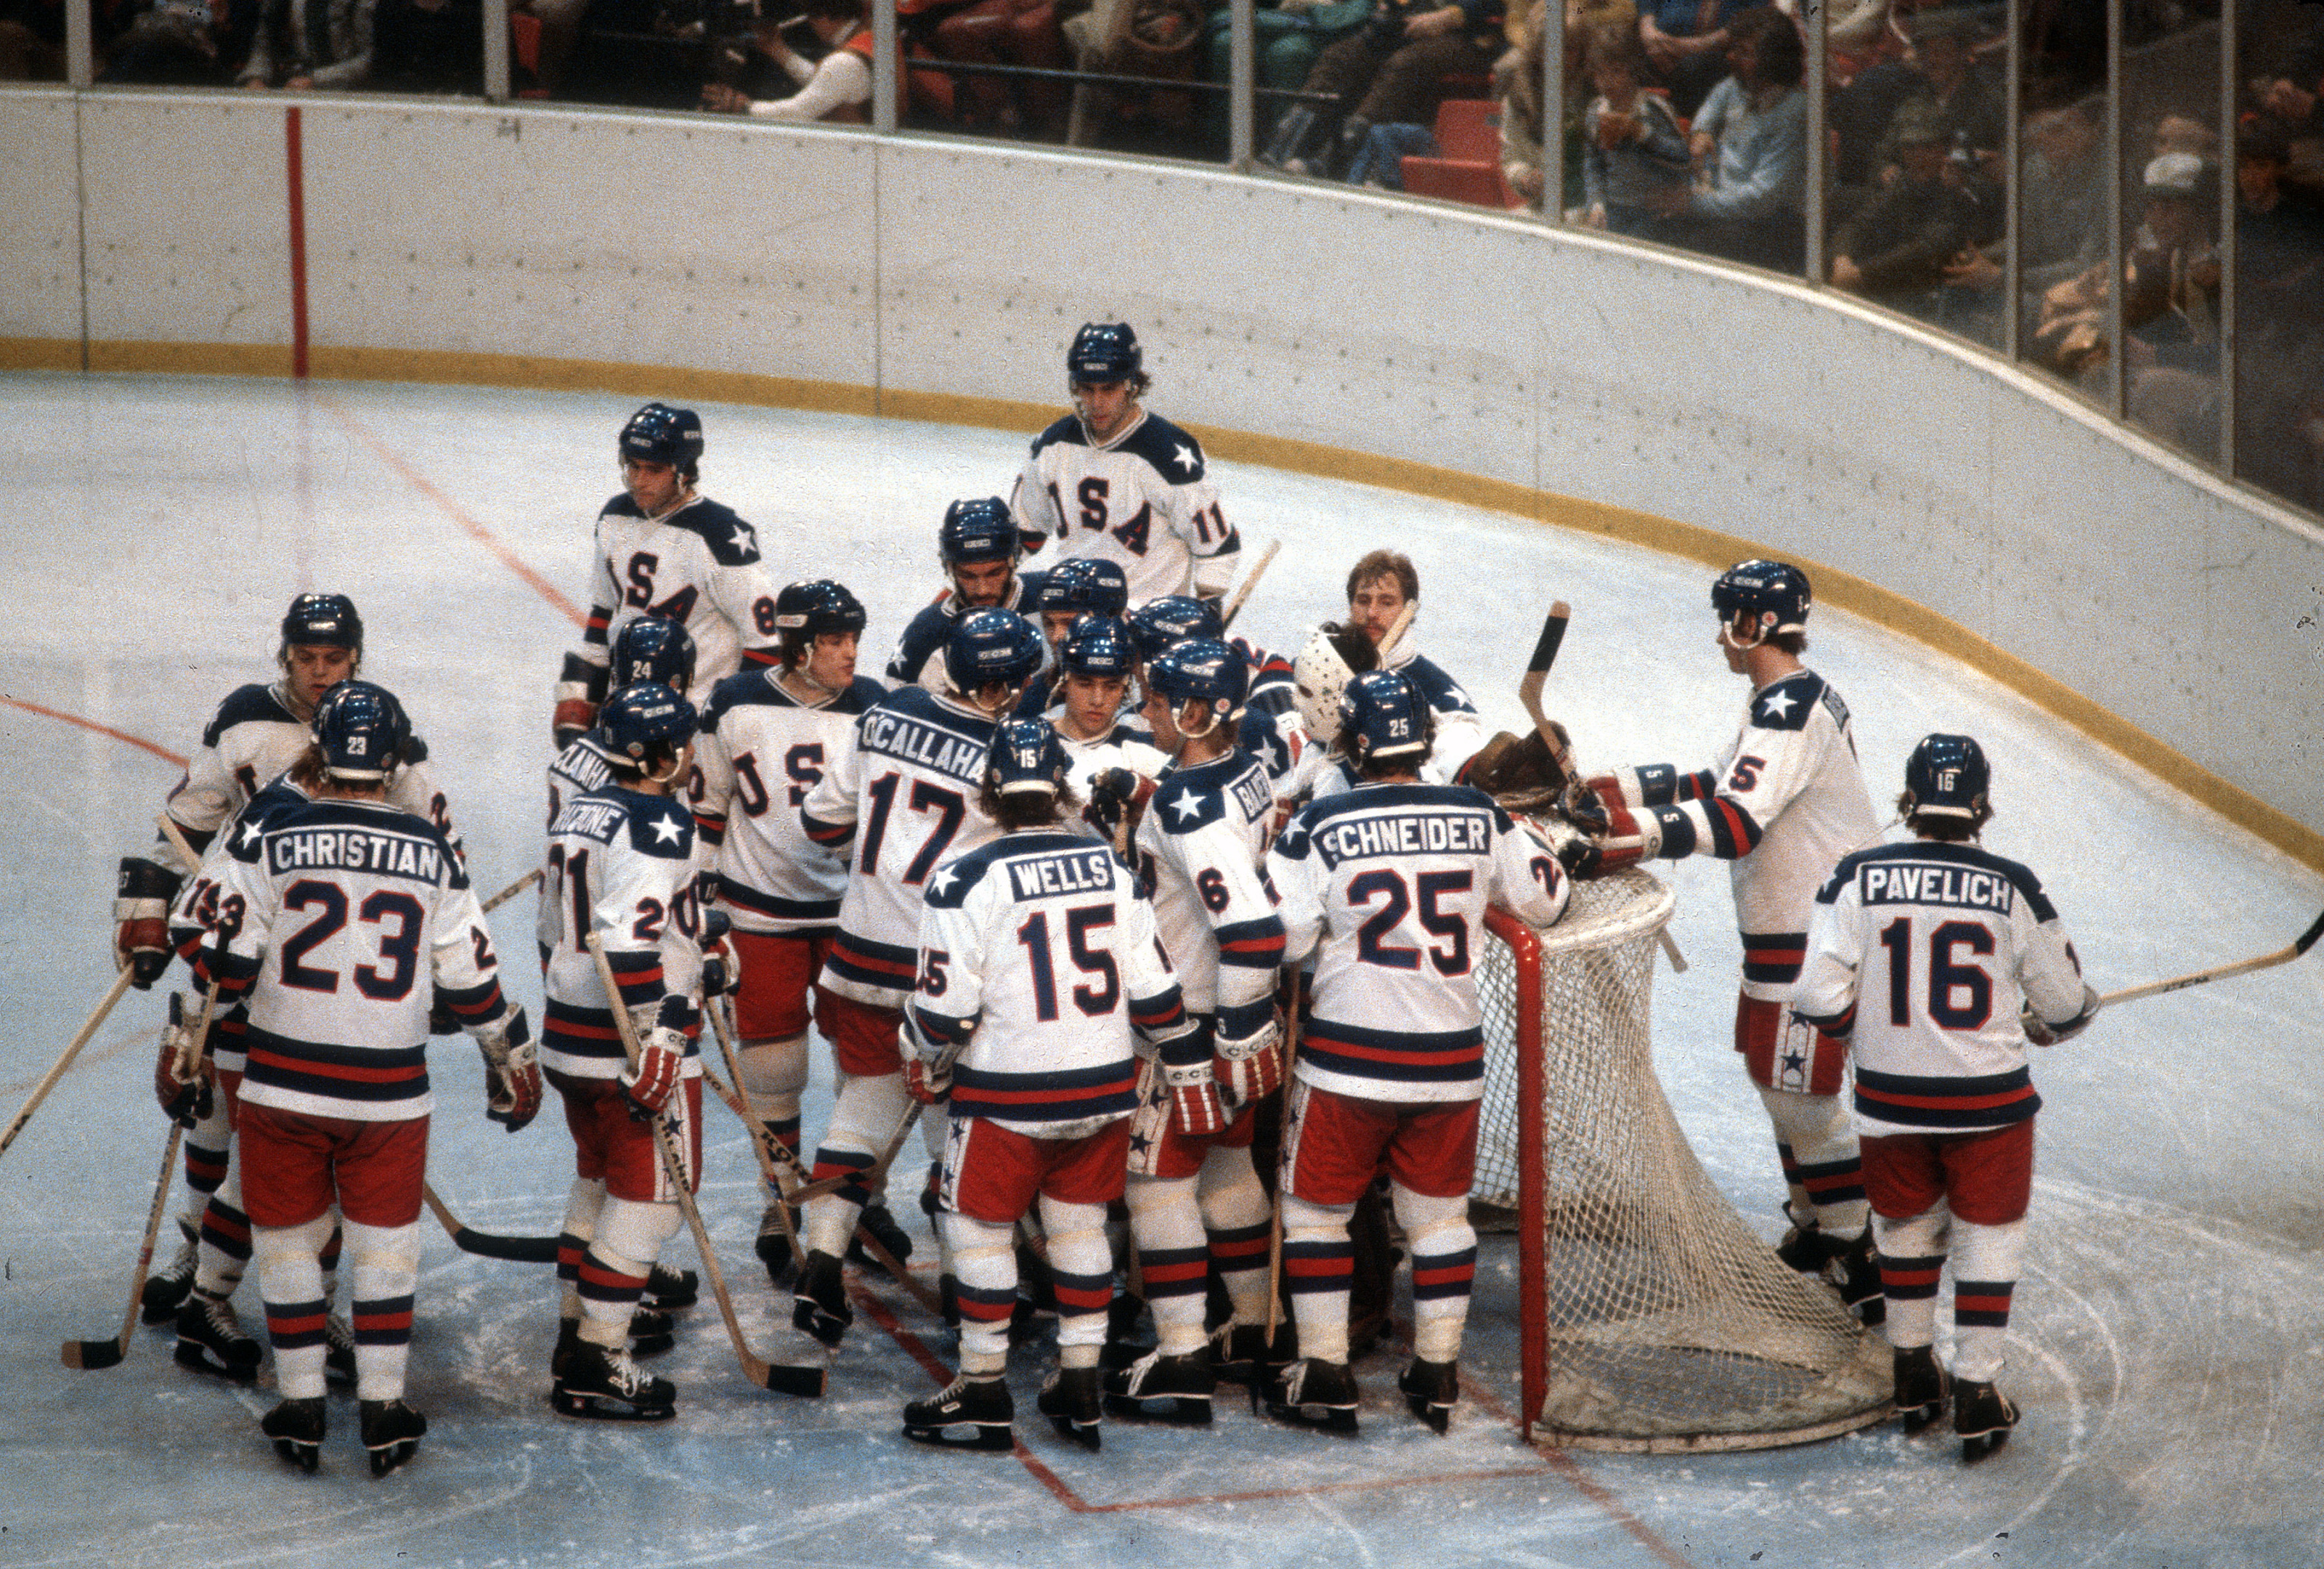 Where the Miracle on Ice Olympic team played college hockey